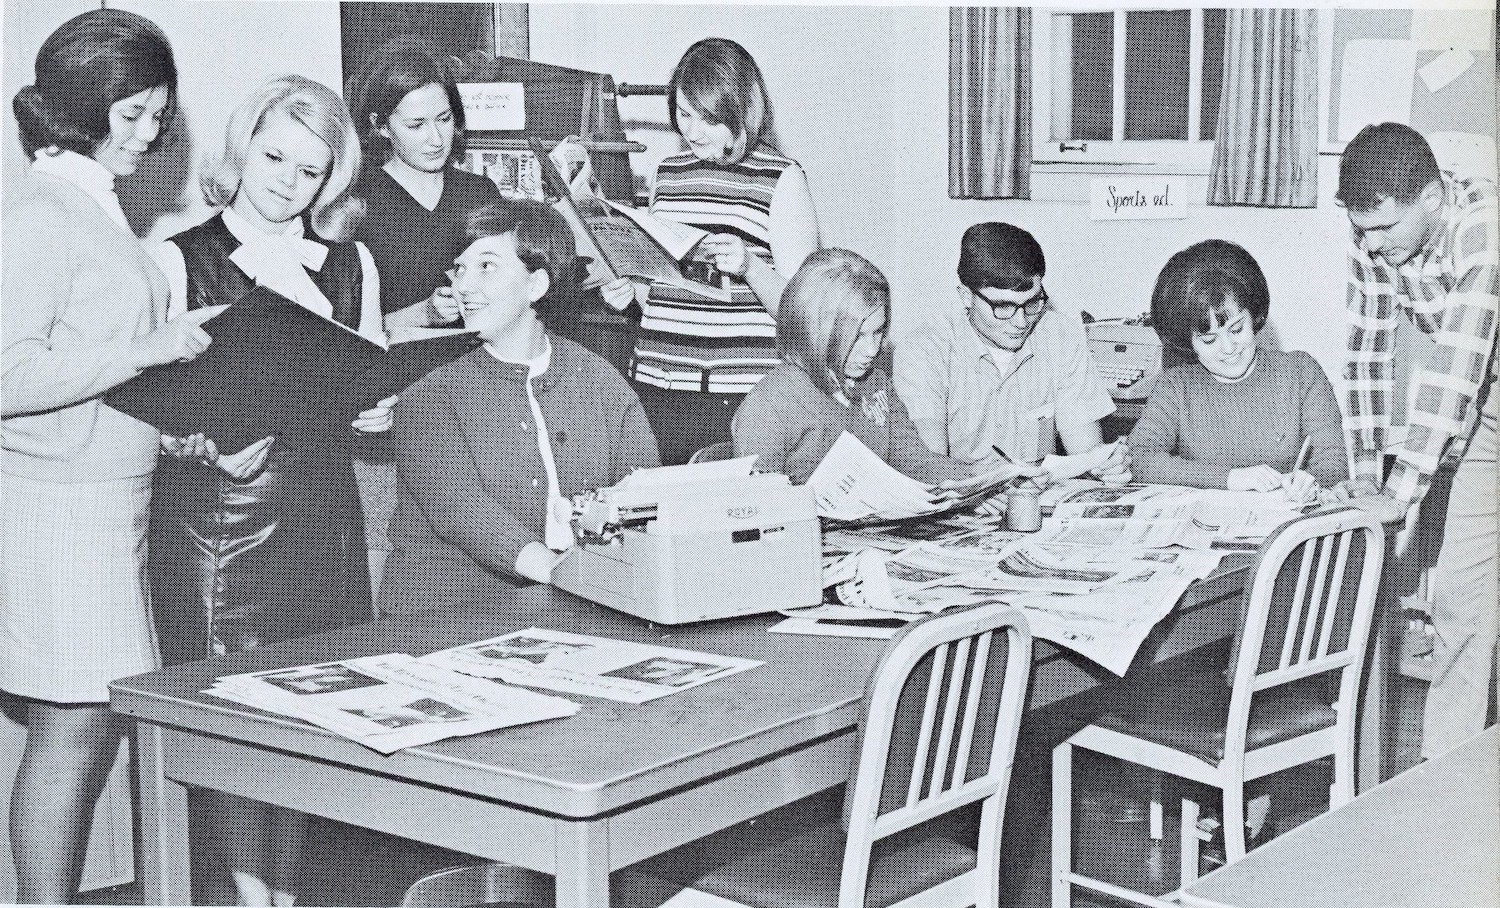 The Oracle staff in 1969